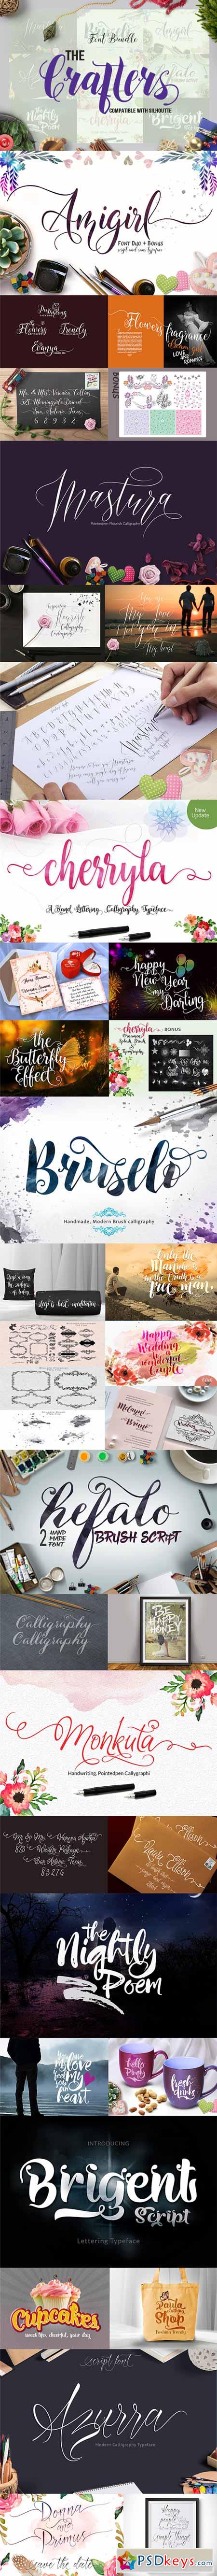 The Crafters Font Bundle